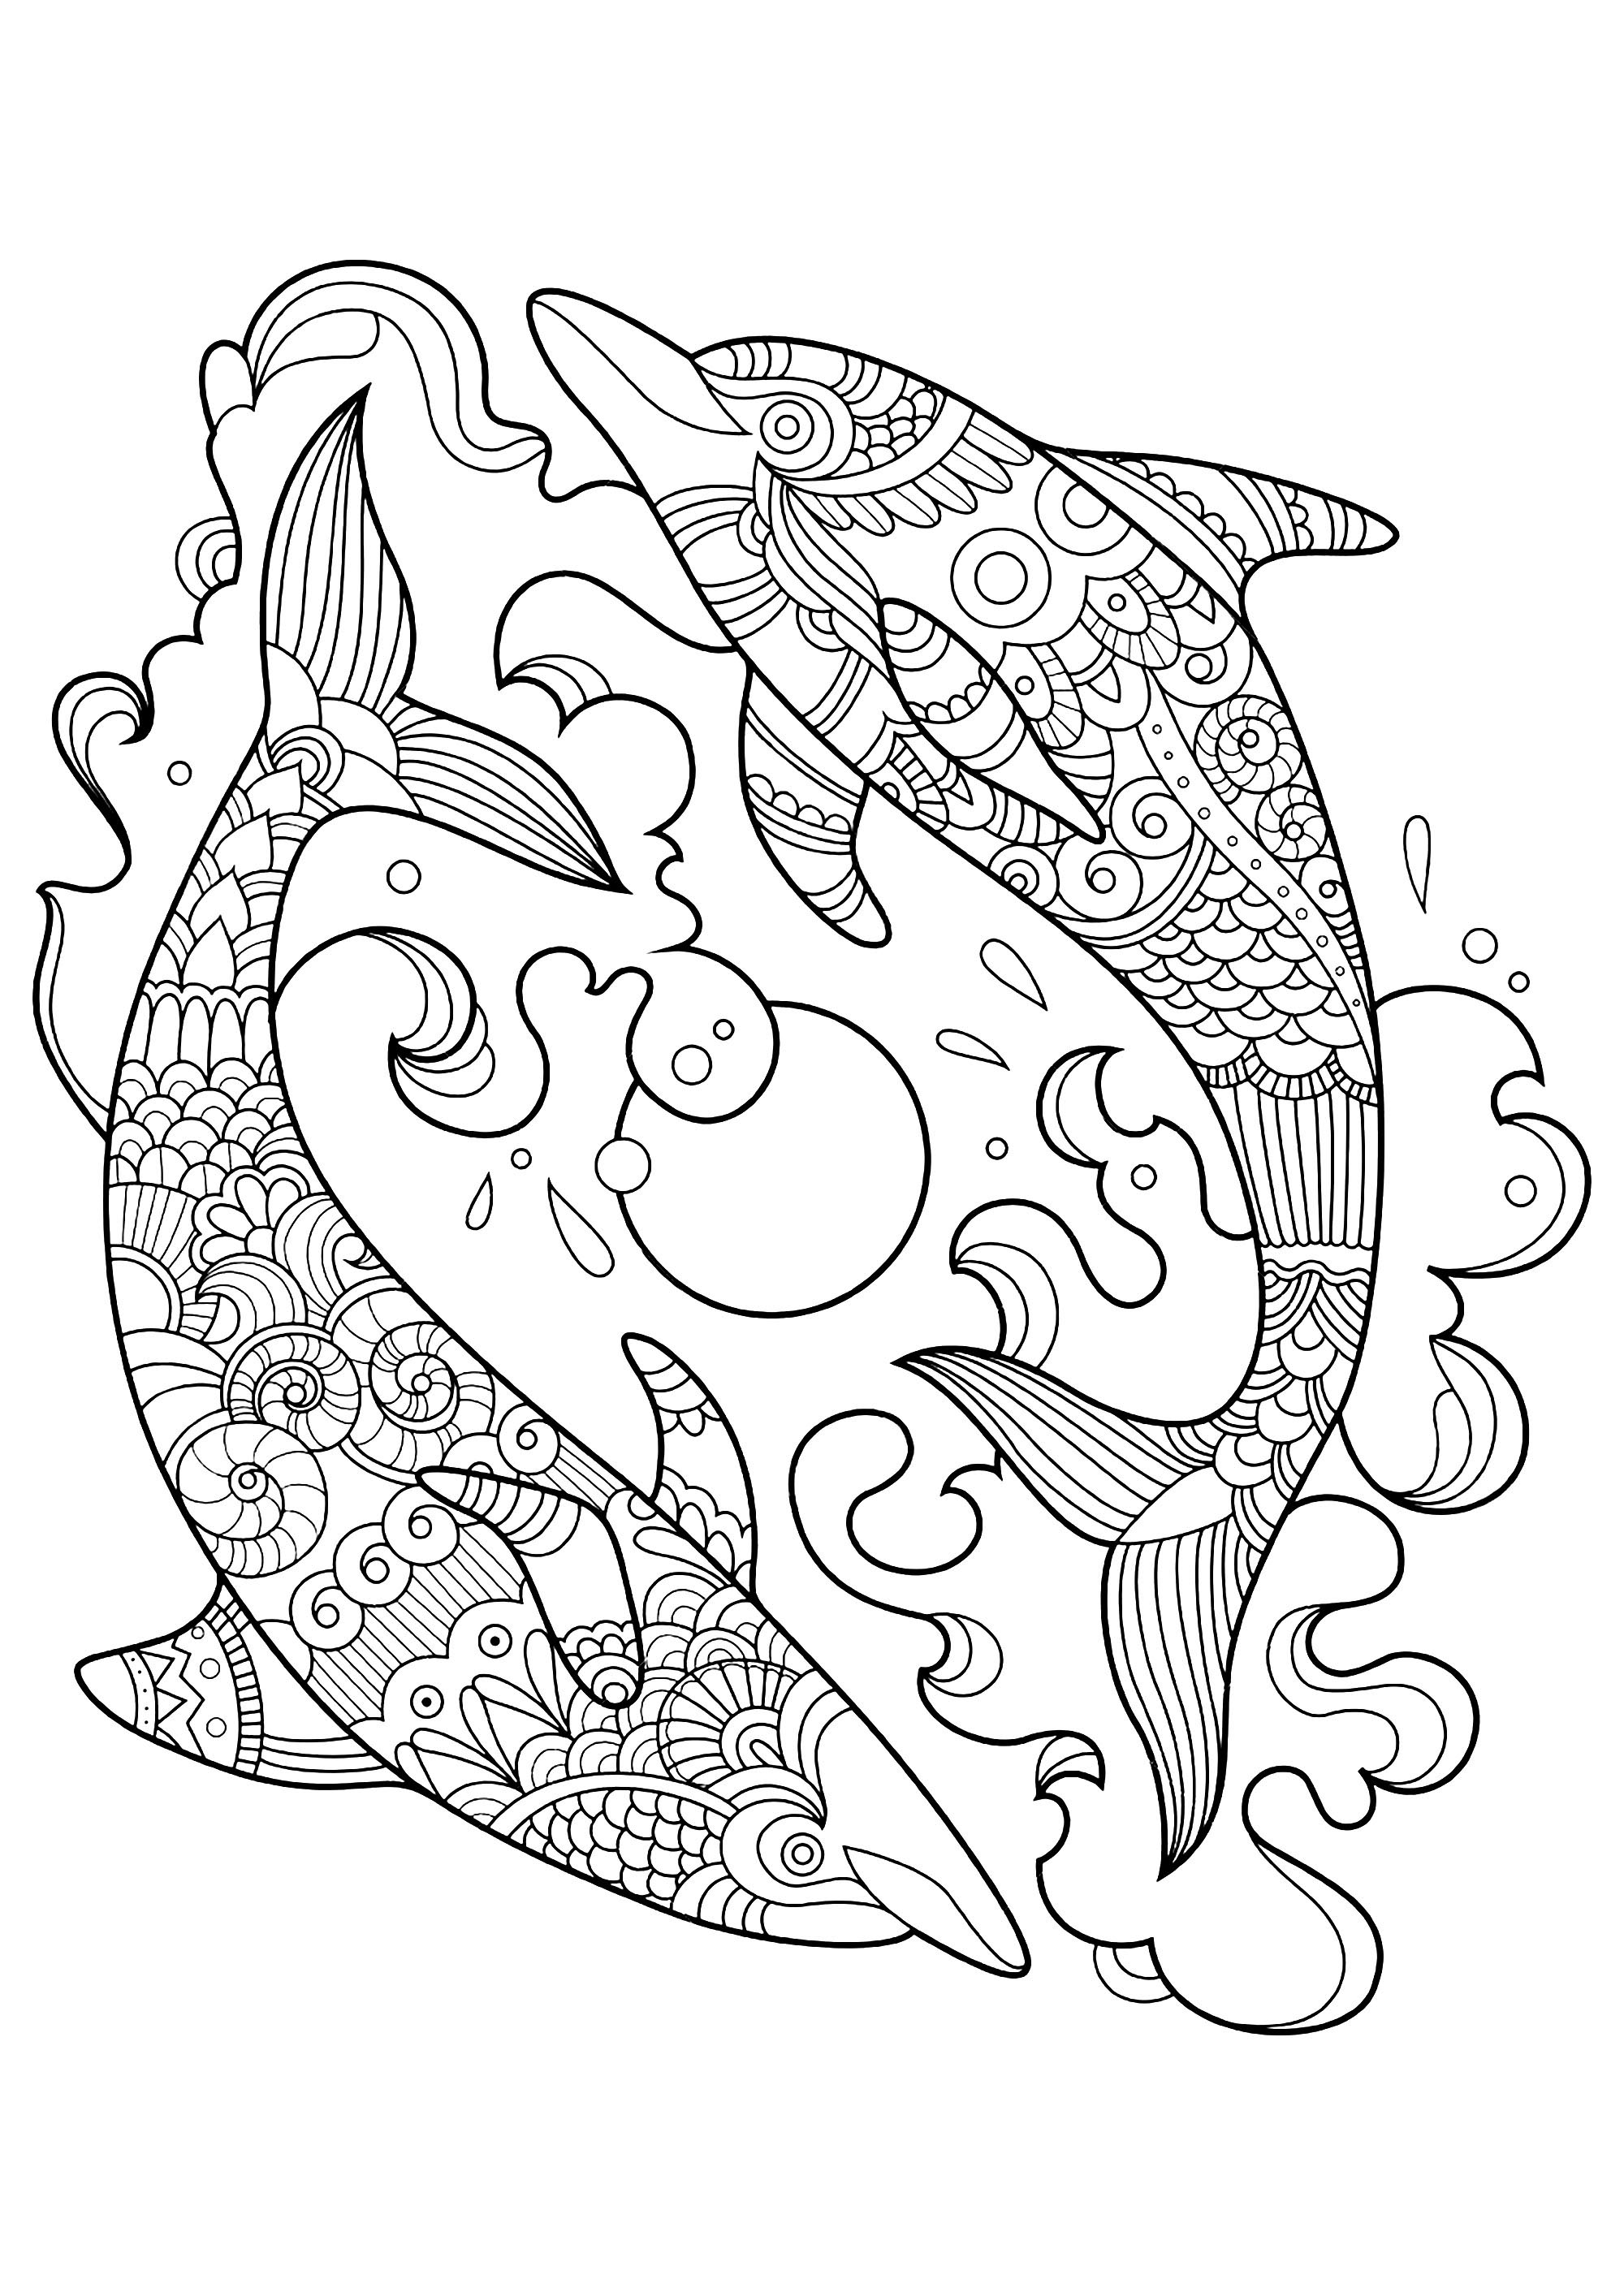 dolphin coloring page dolphins to color for children dolphins kids coloring pages dolphin coloring page 